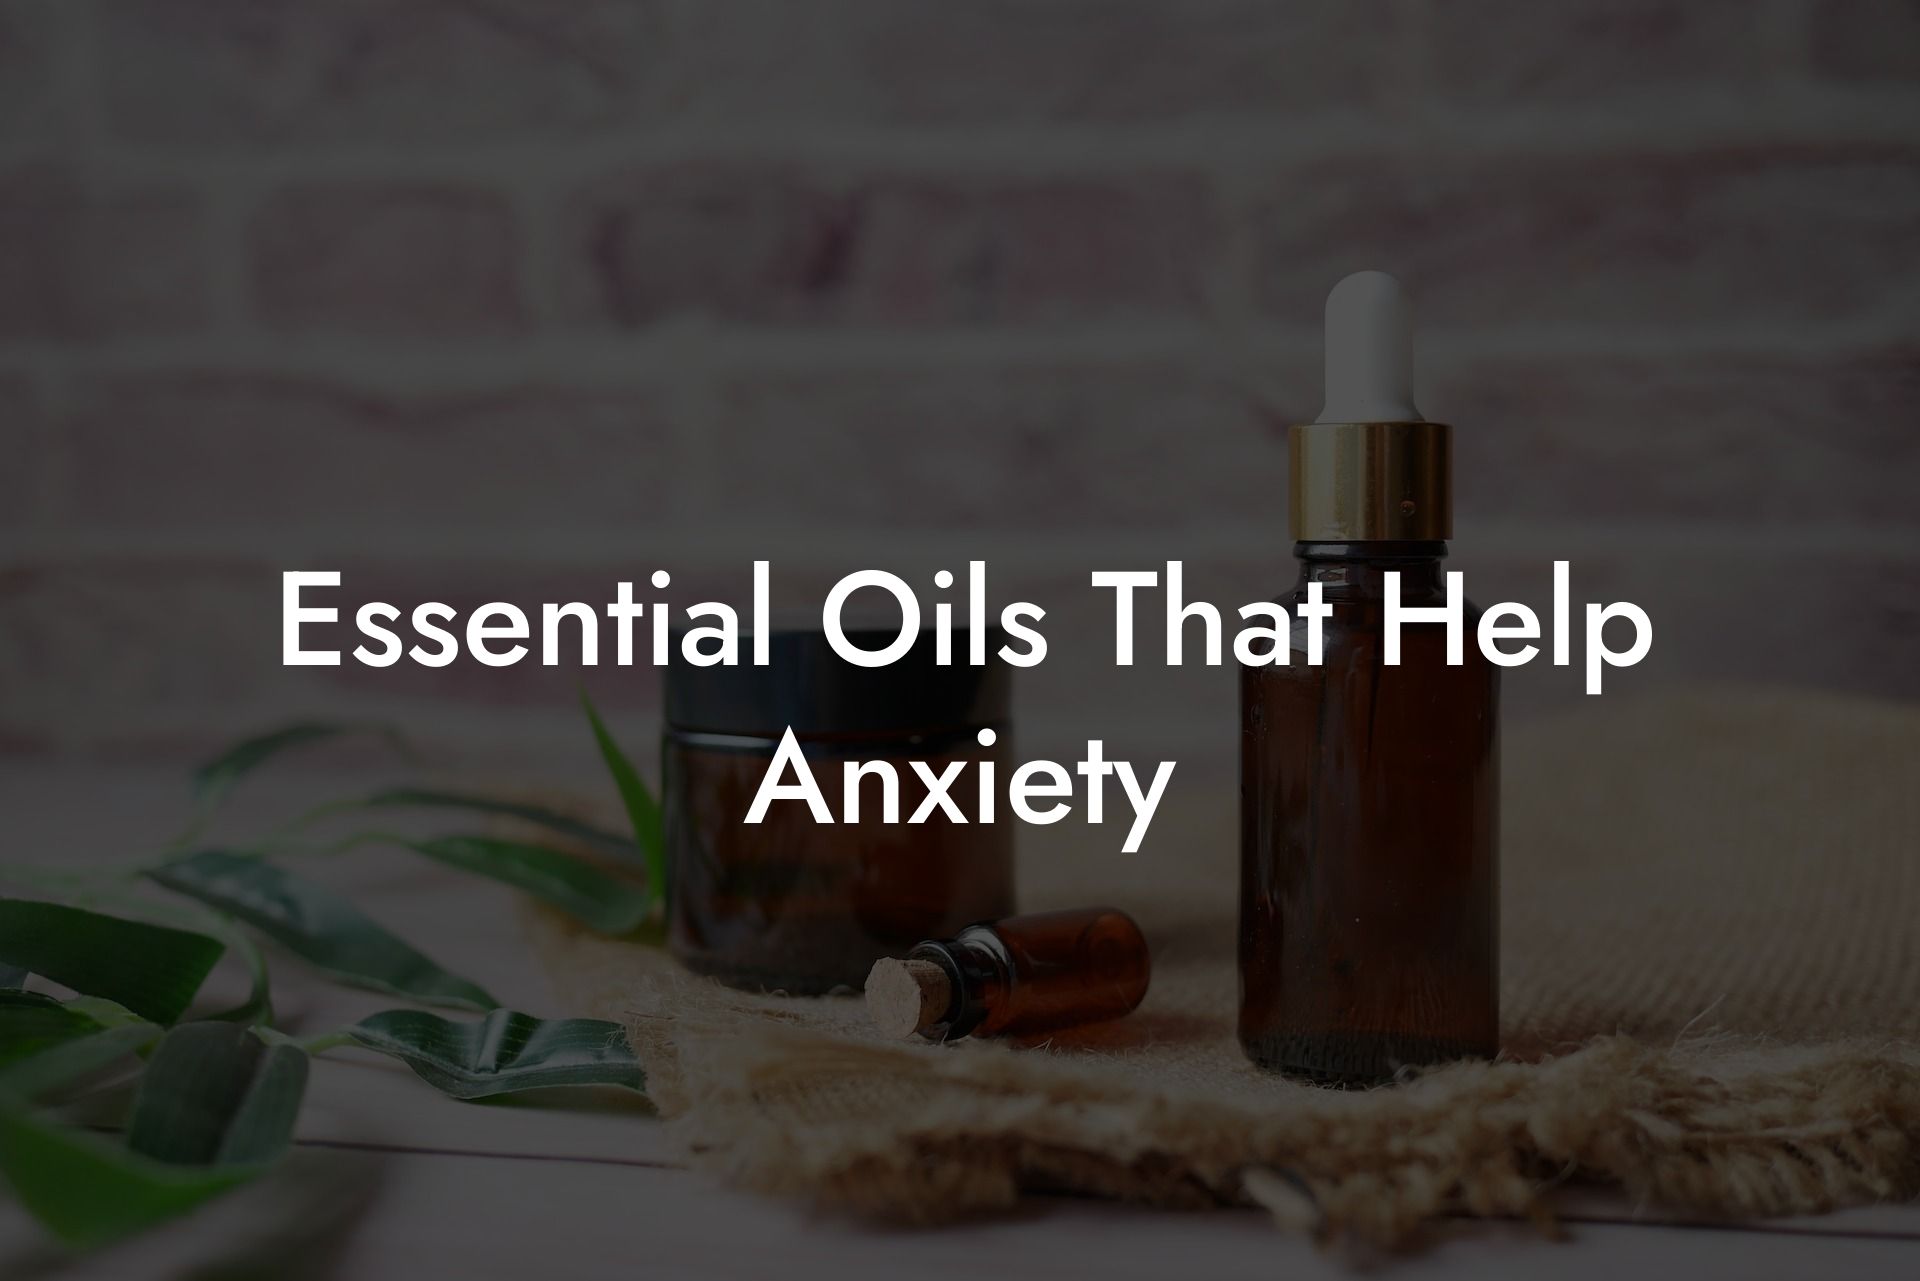 Essential Oils That Help Anxiety